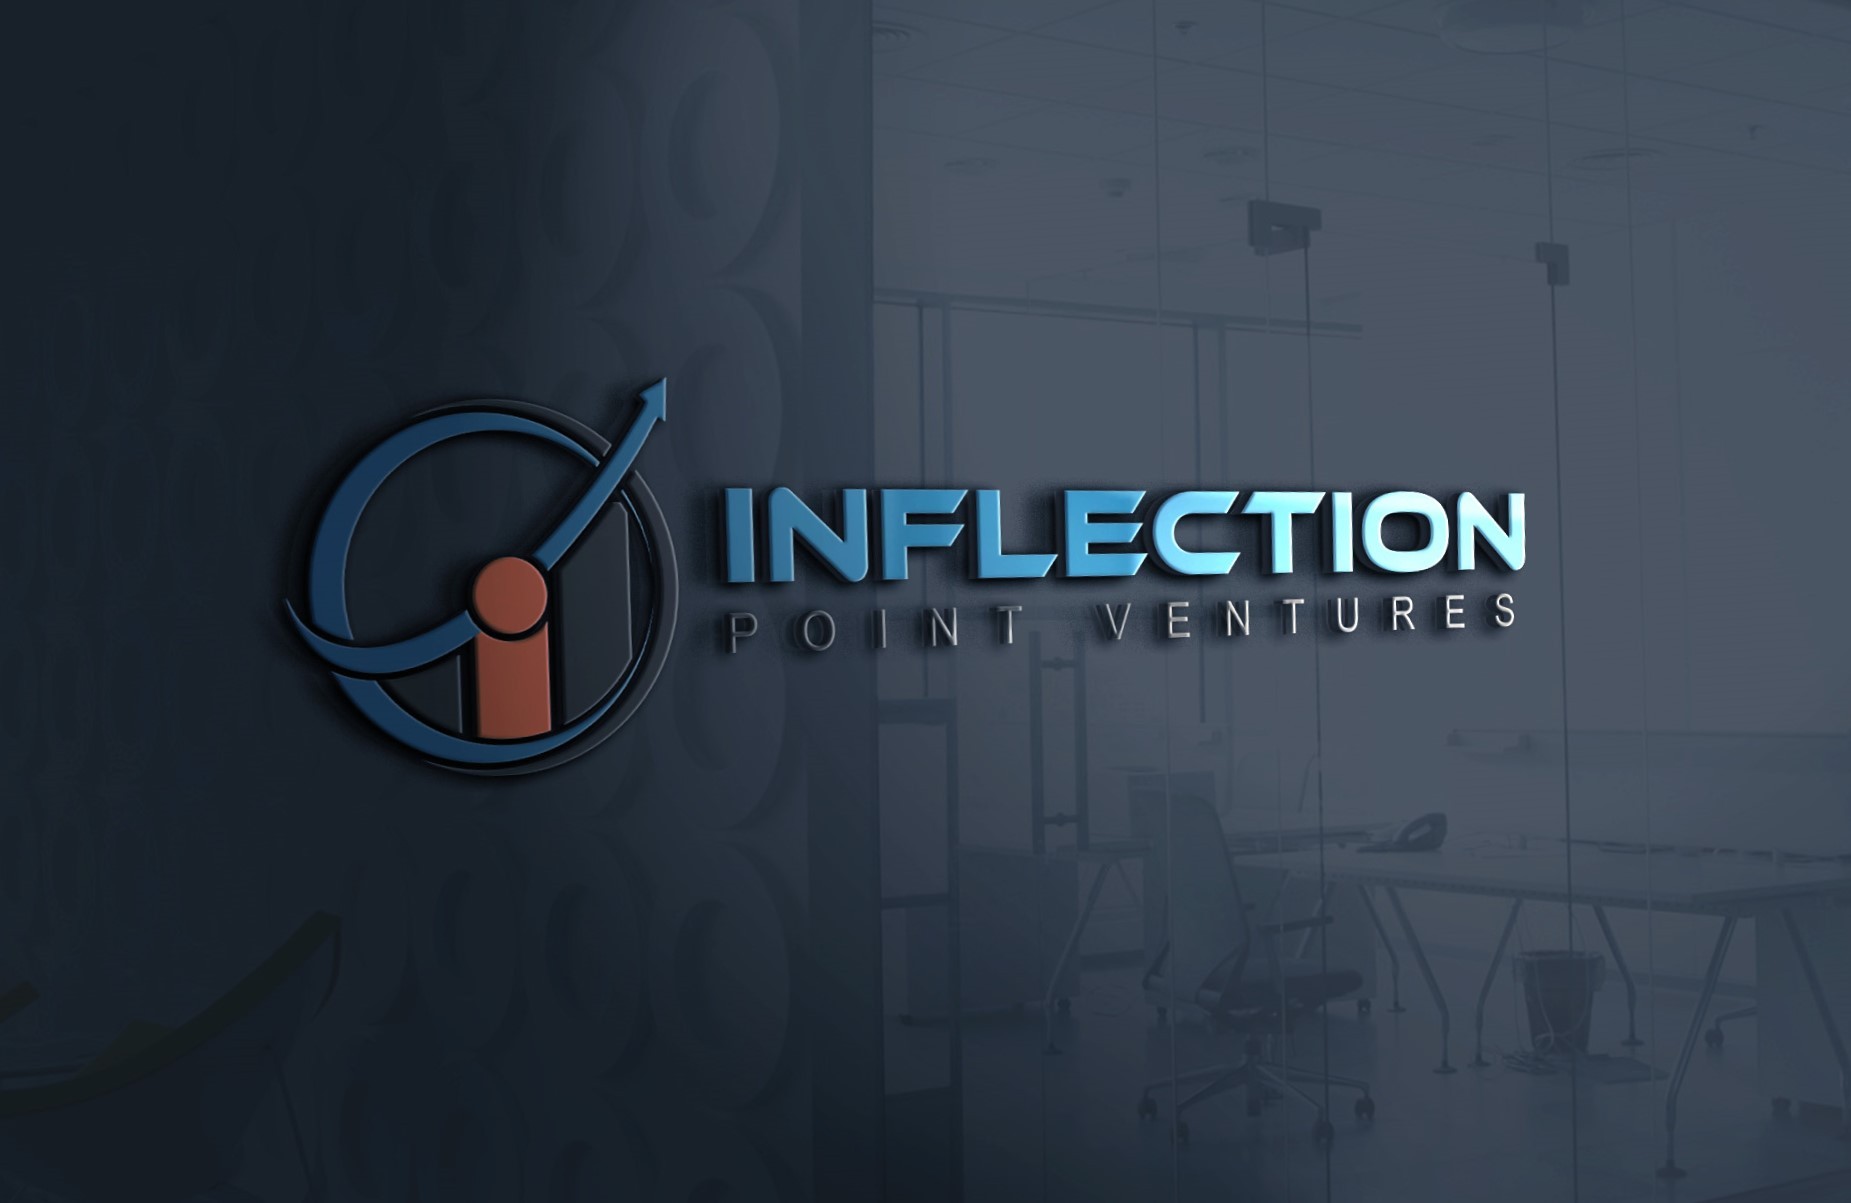 inflection point ventures careers and current employee profiles | find referrals | linkedin